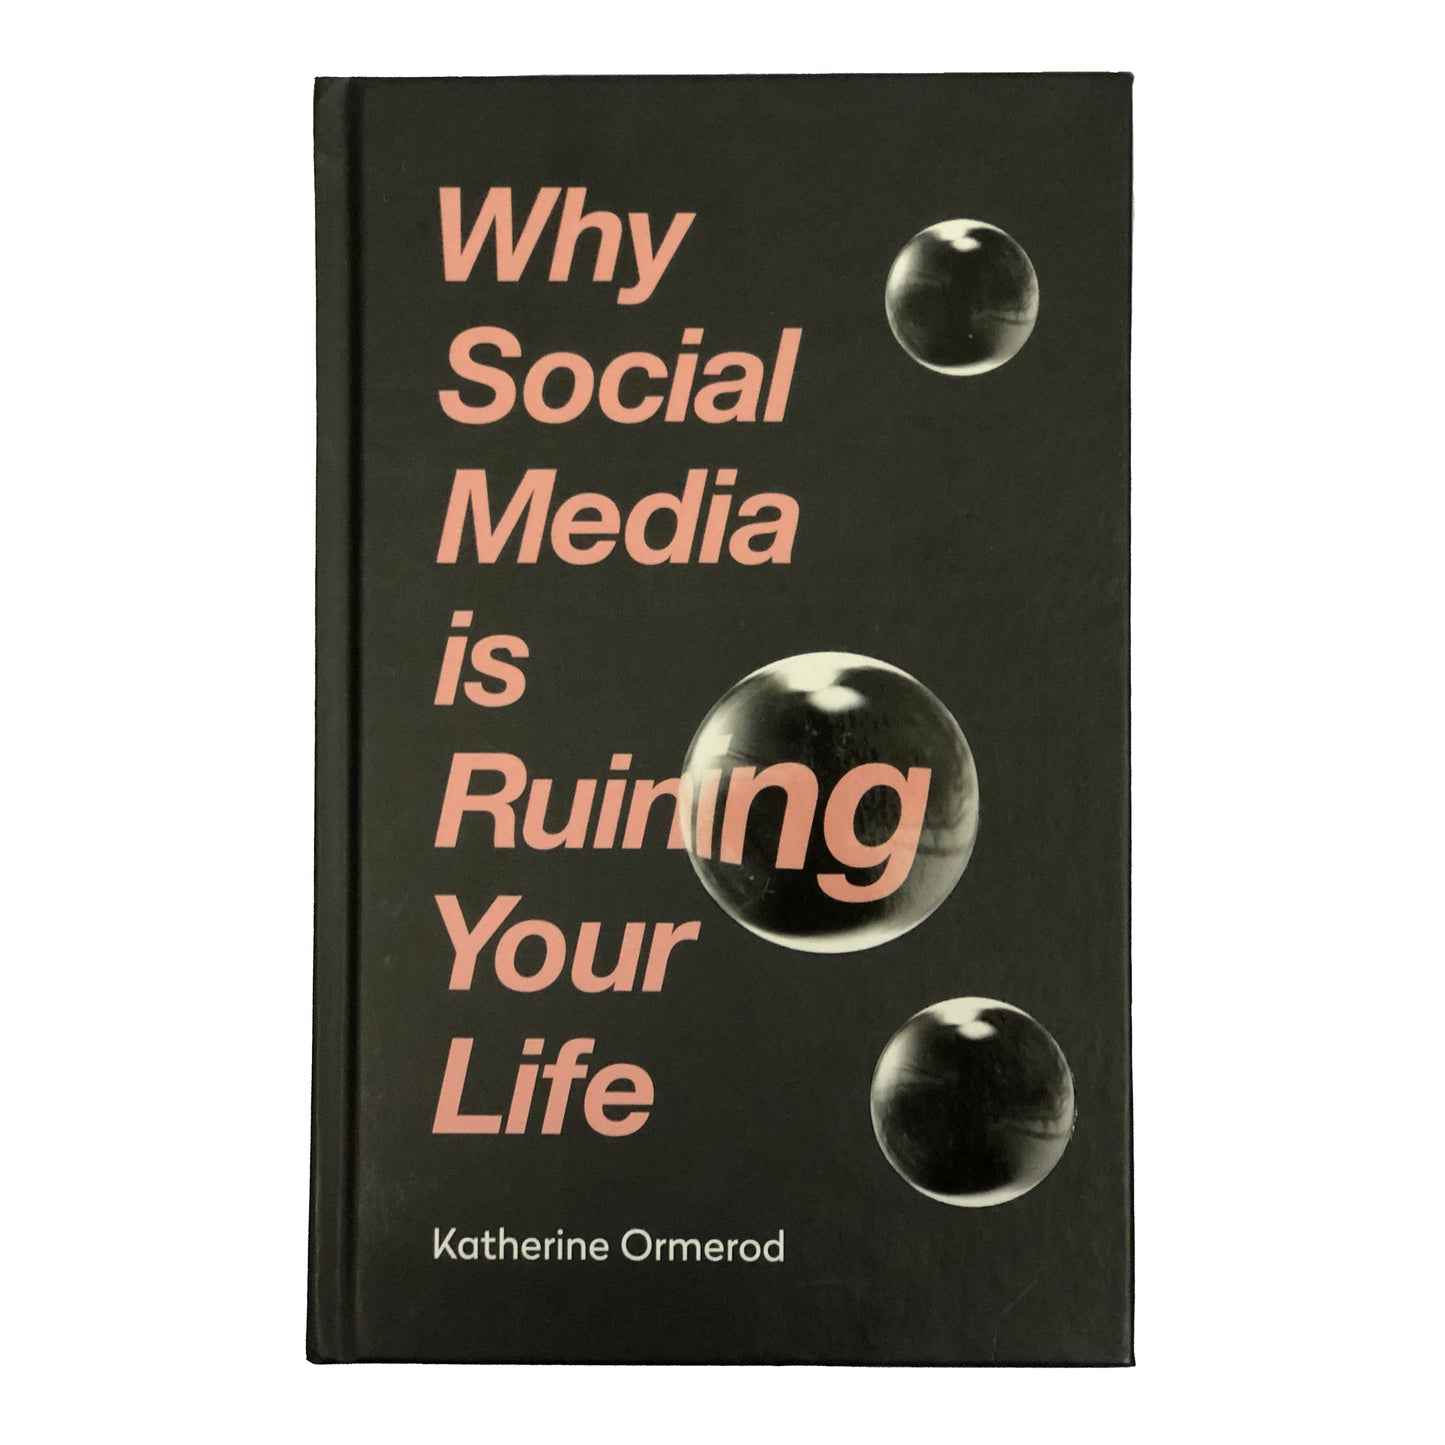 Why Social Media ruining your Life by Katherine Ormerod